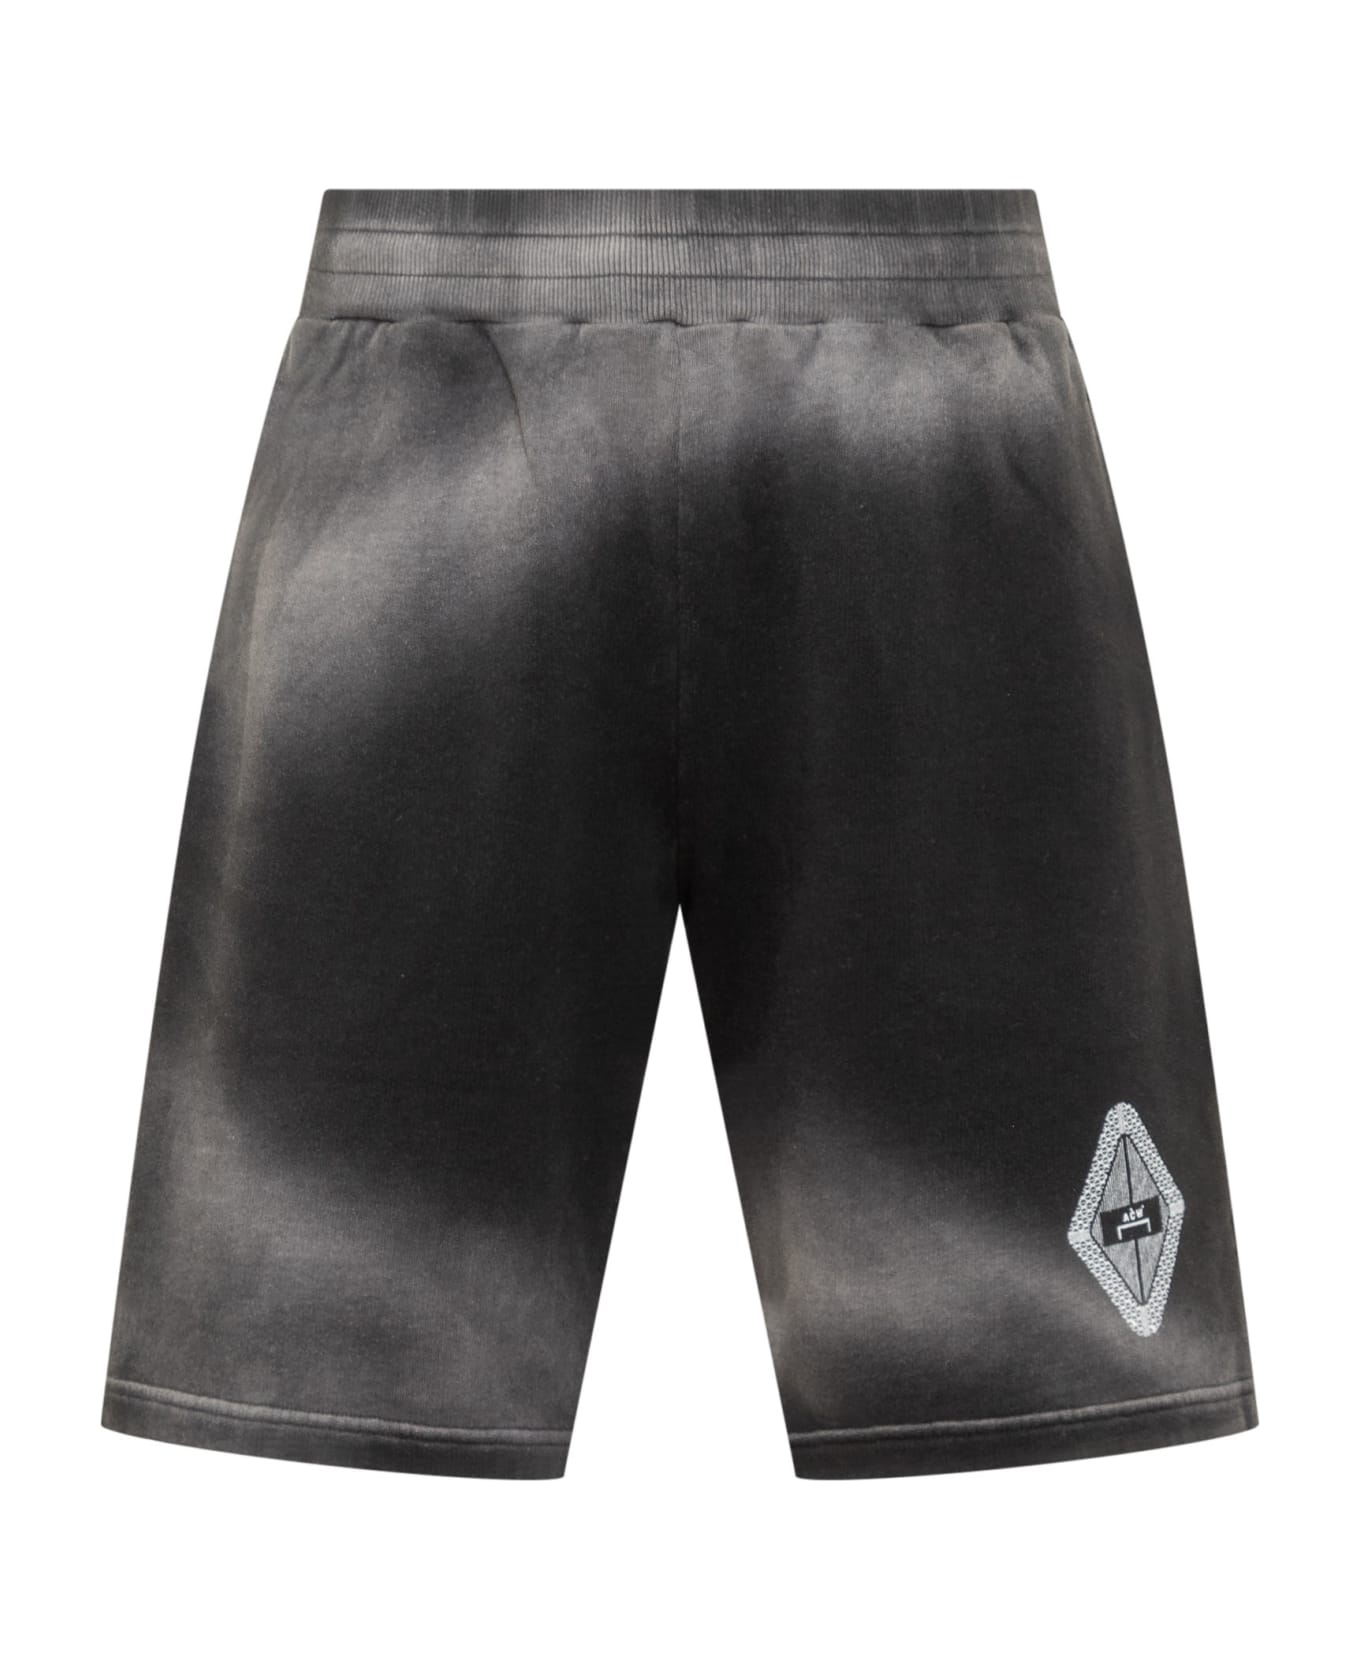 A-COLD-WALL Gradient Jersey Shorts - BLACK